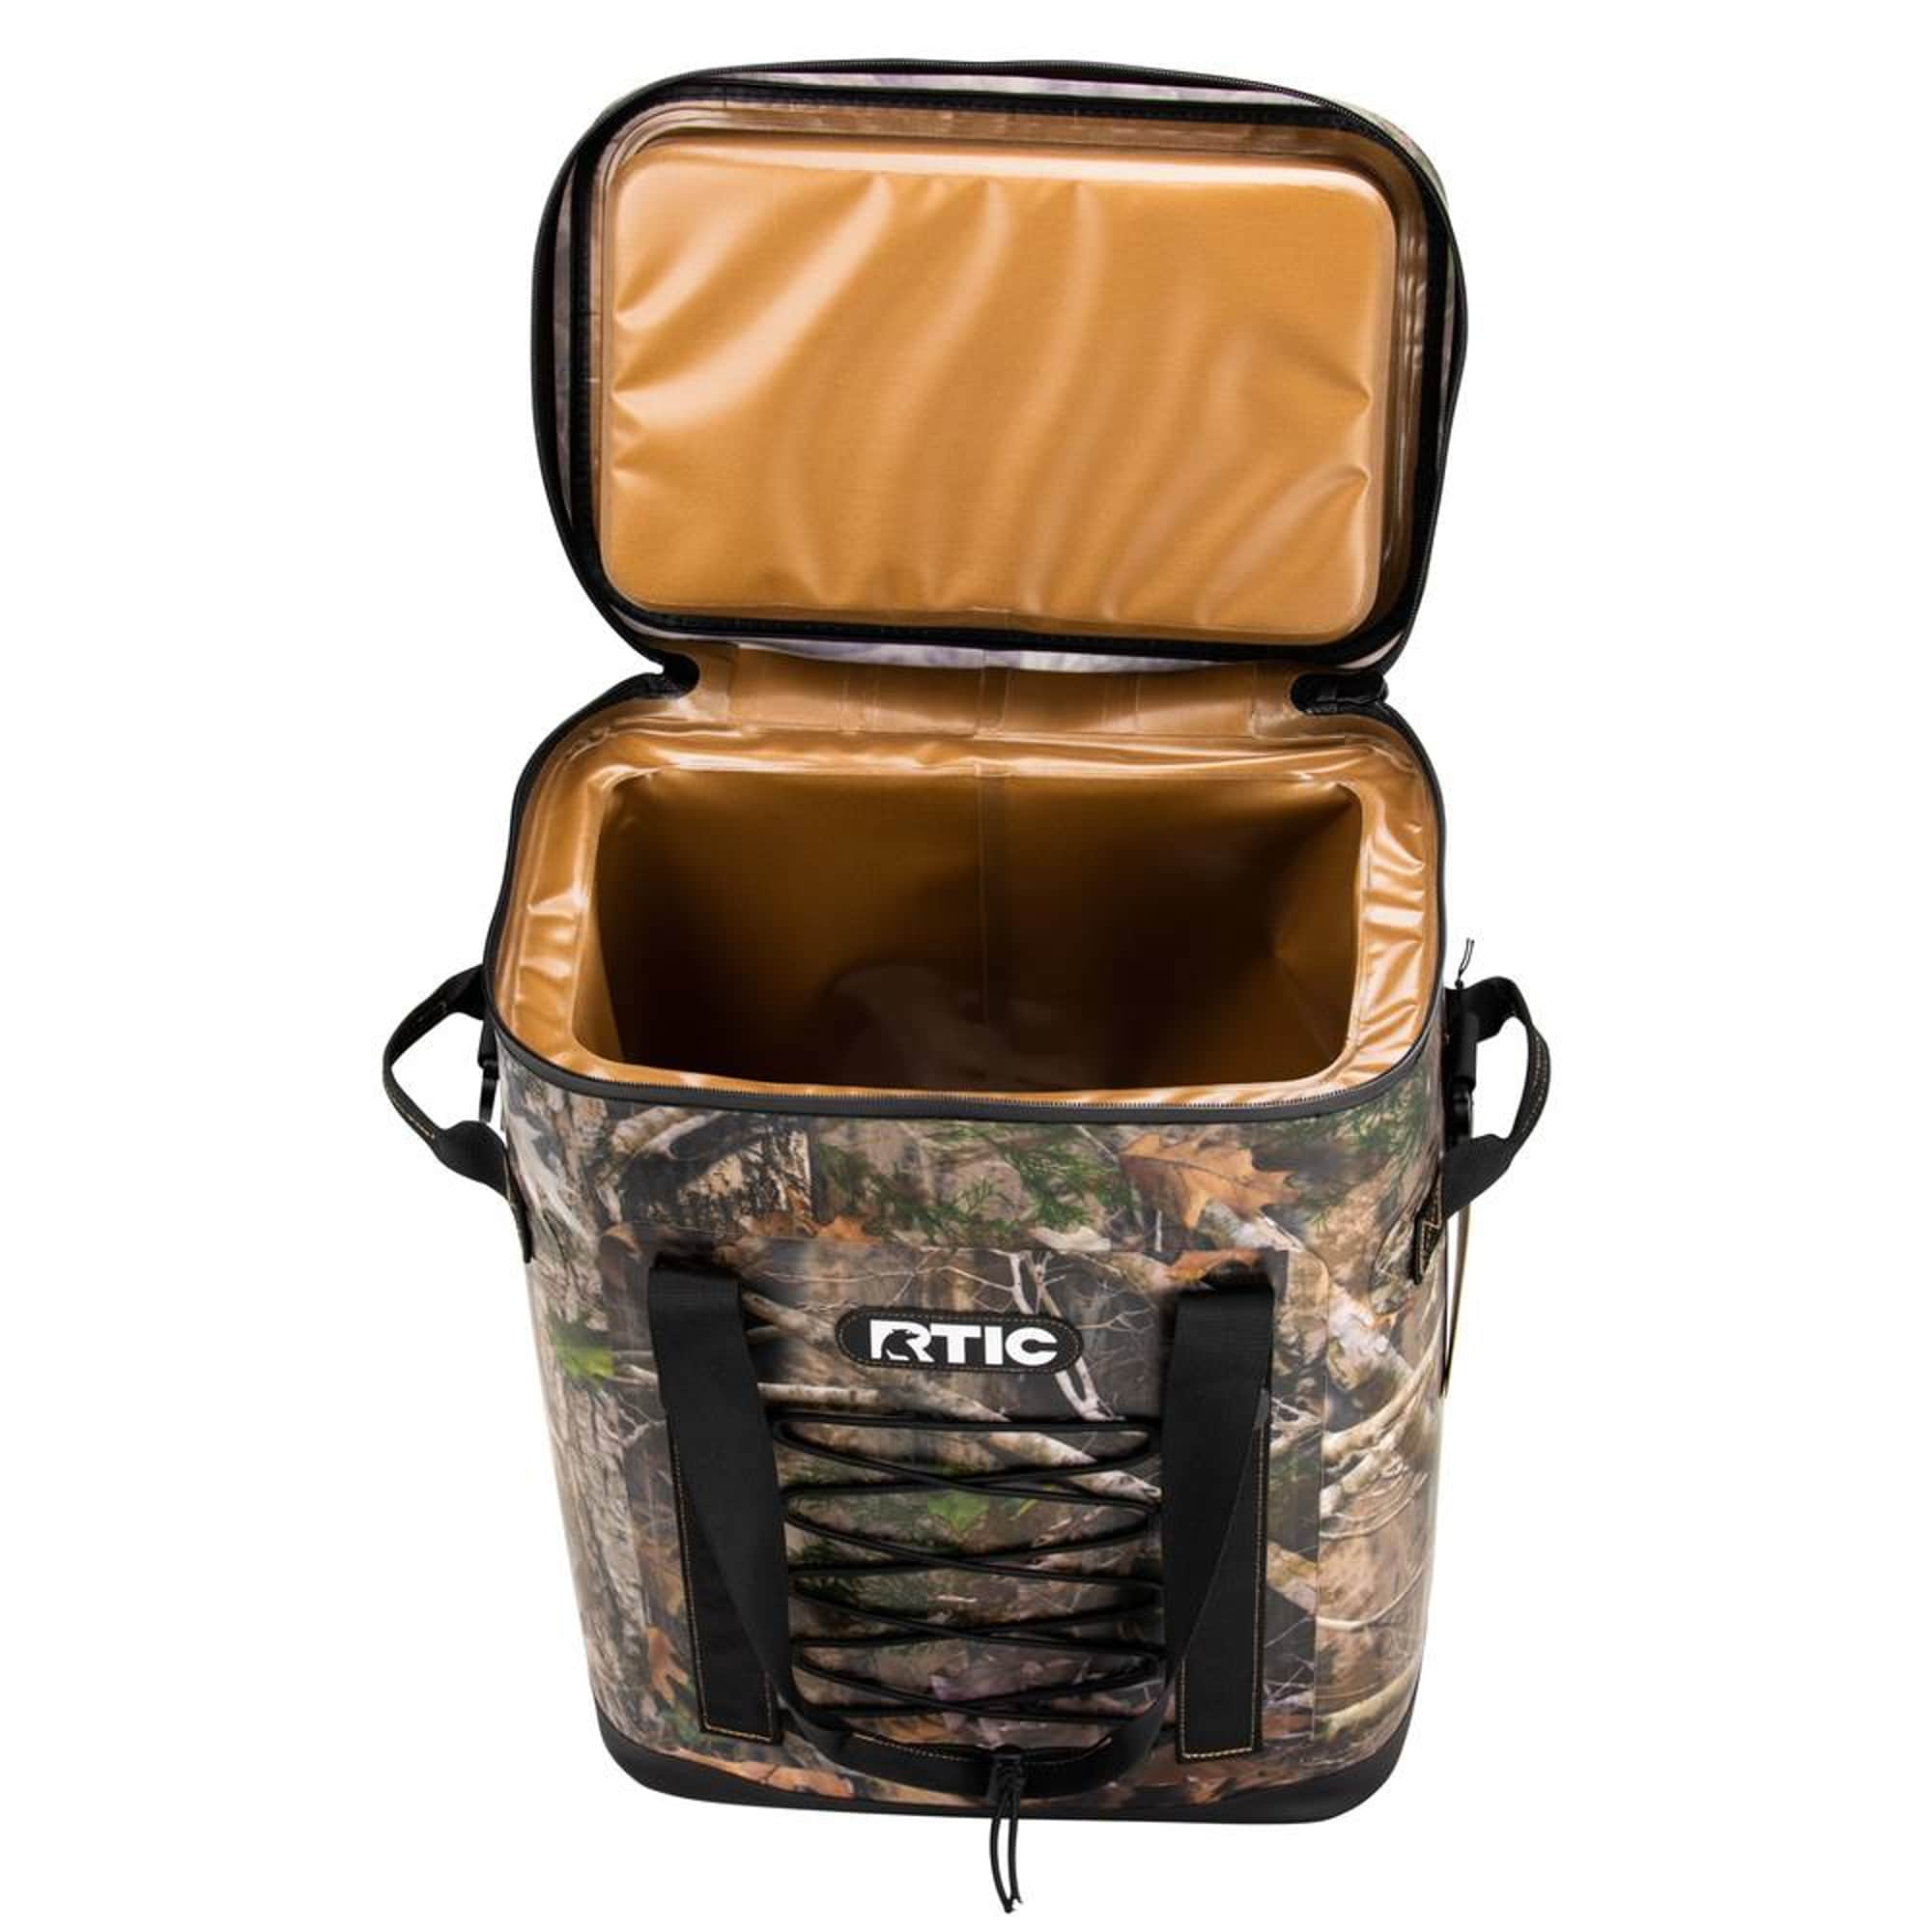 RTIC Soft Pack 30, Camo–